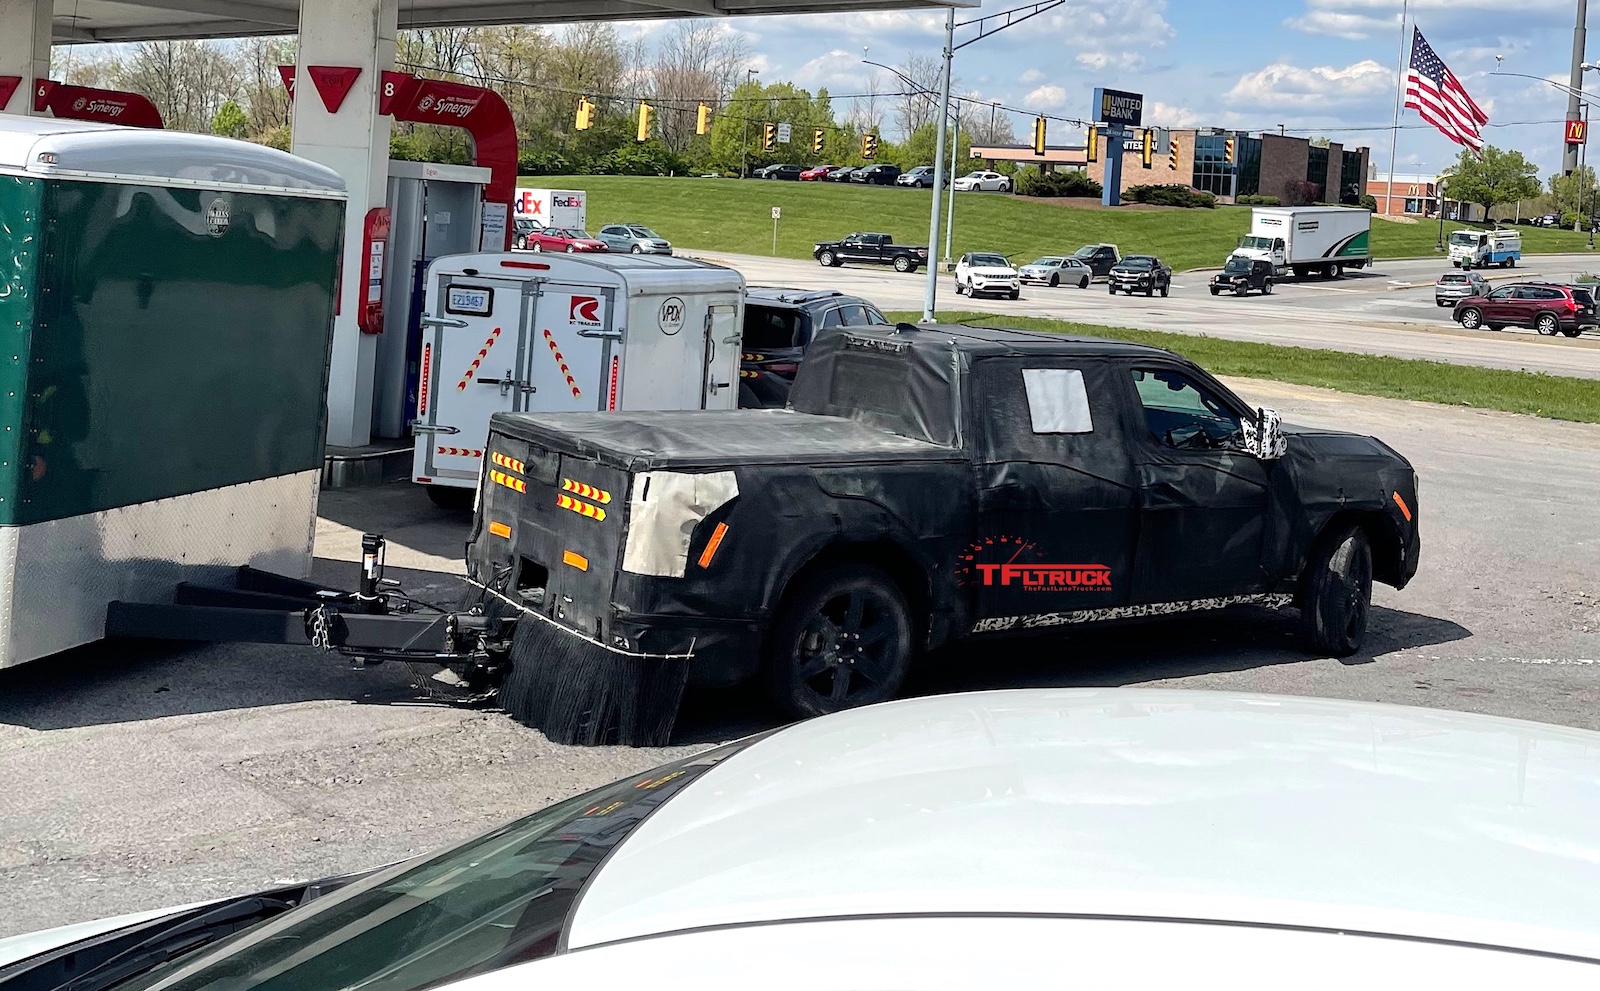 Spied! This 2022 Toyota Tundra Prototype Has a Serious Towing Package